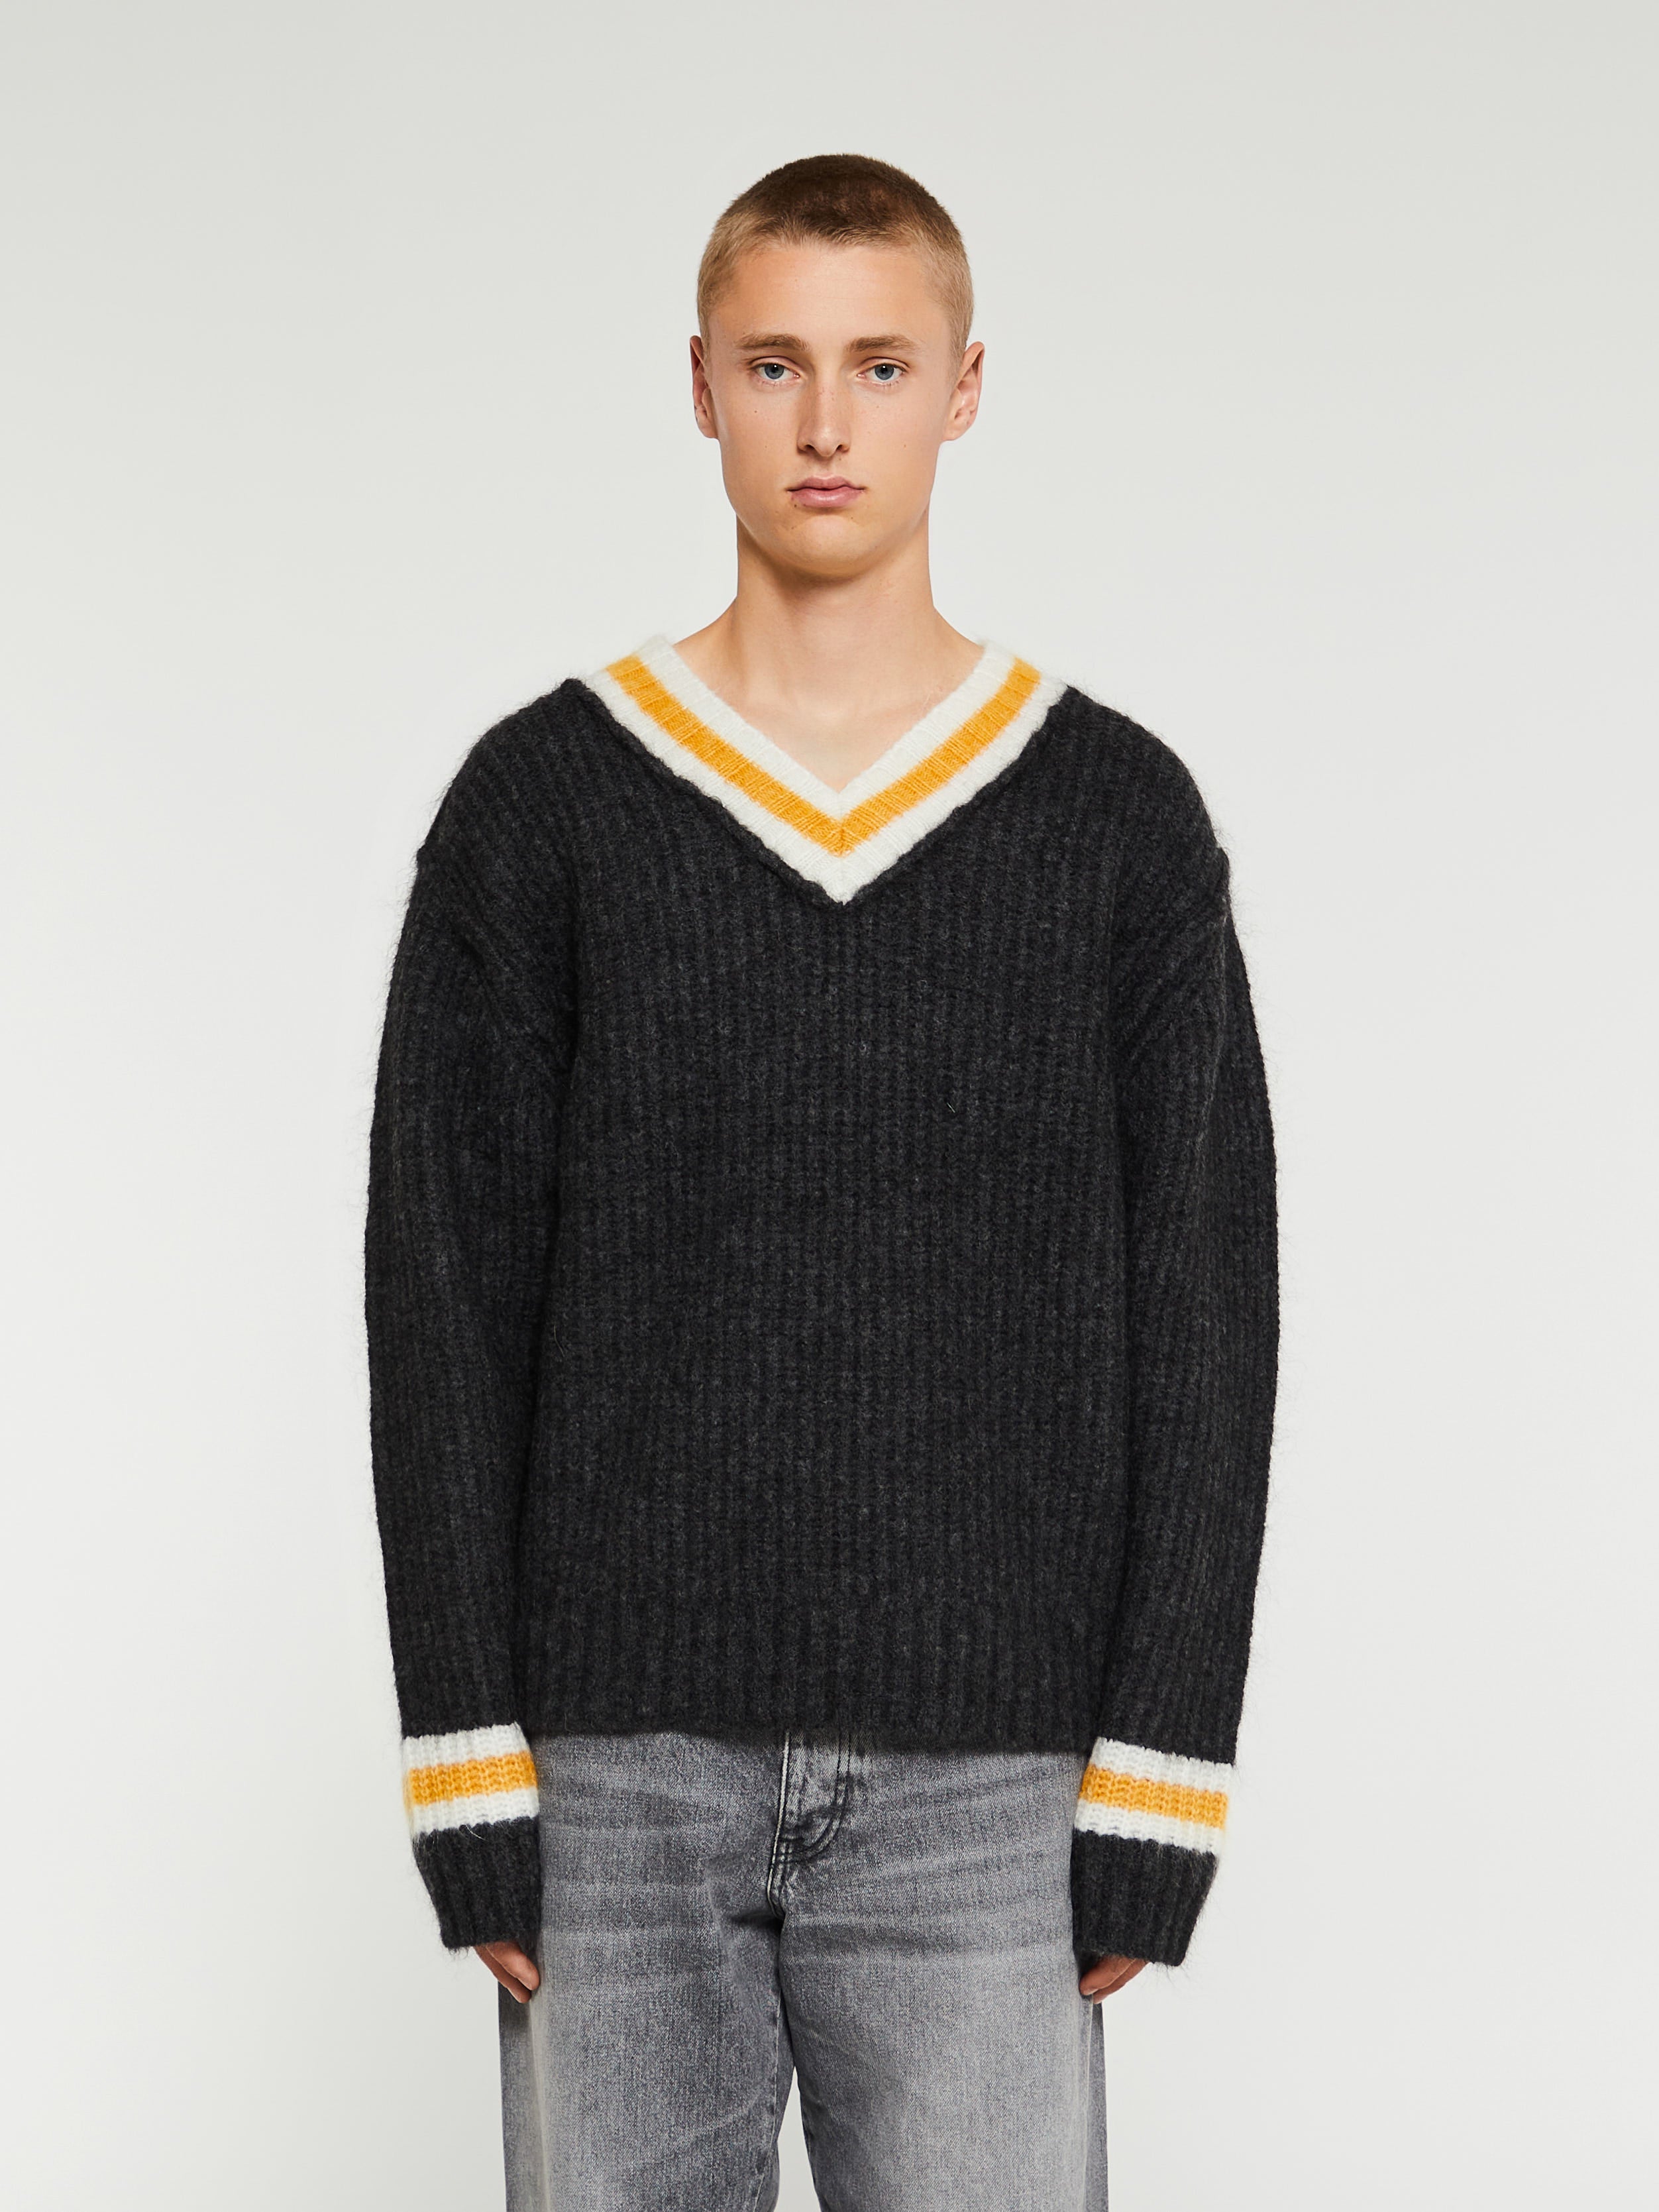 Stüssy - Mohair Tennis Sweater in Charcoal